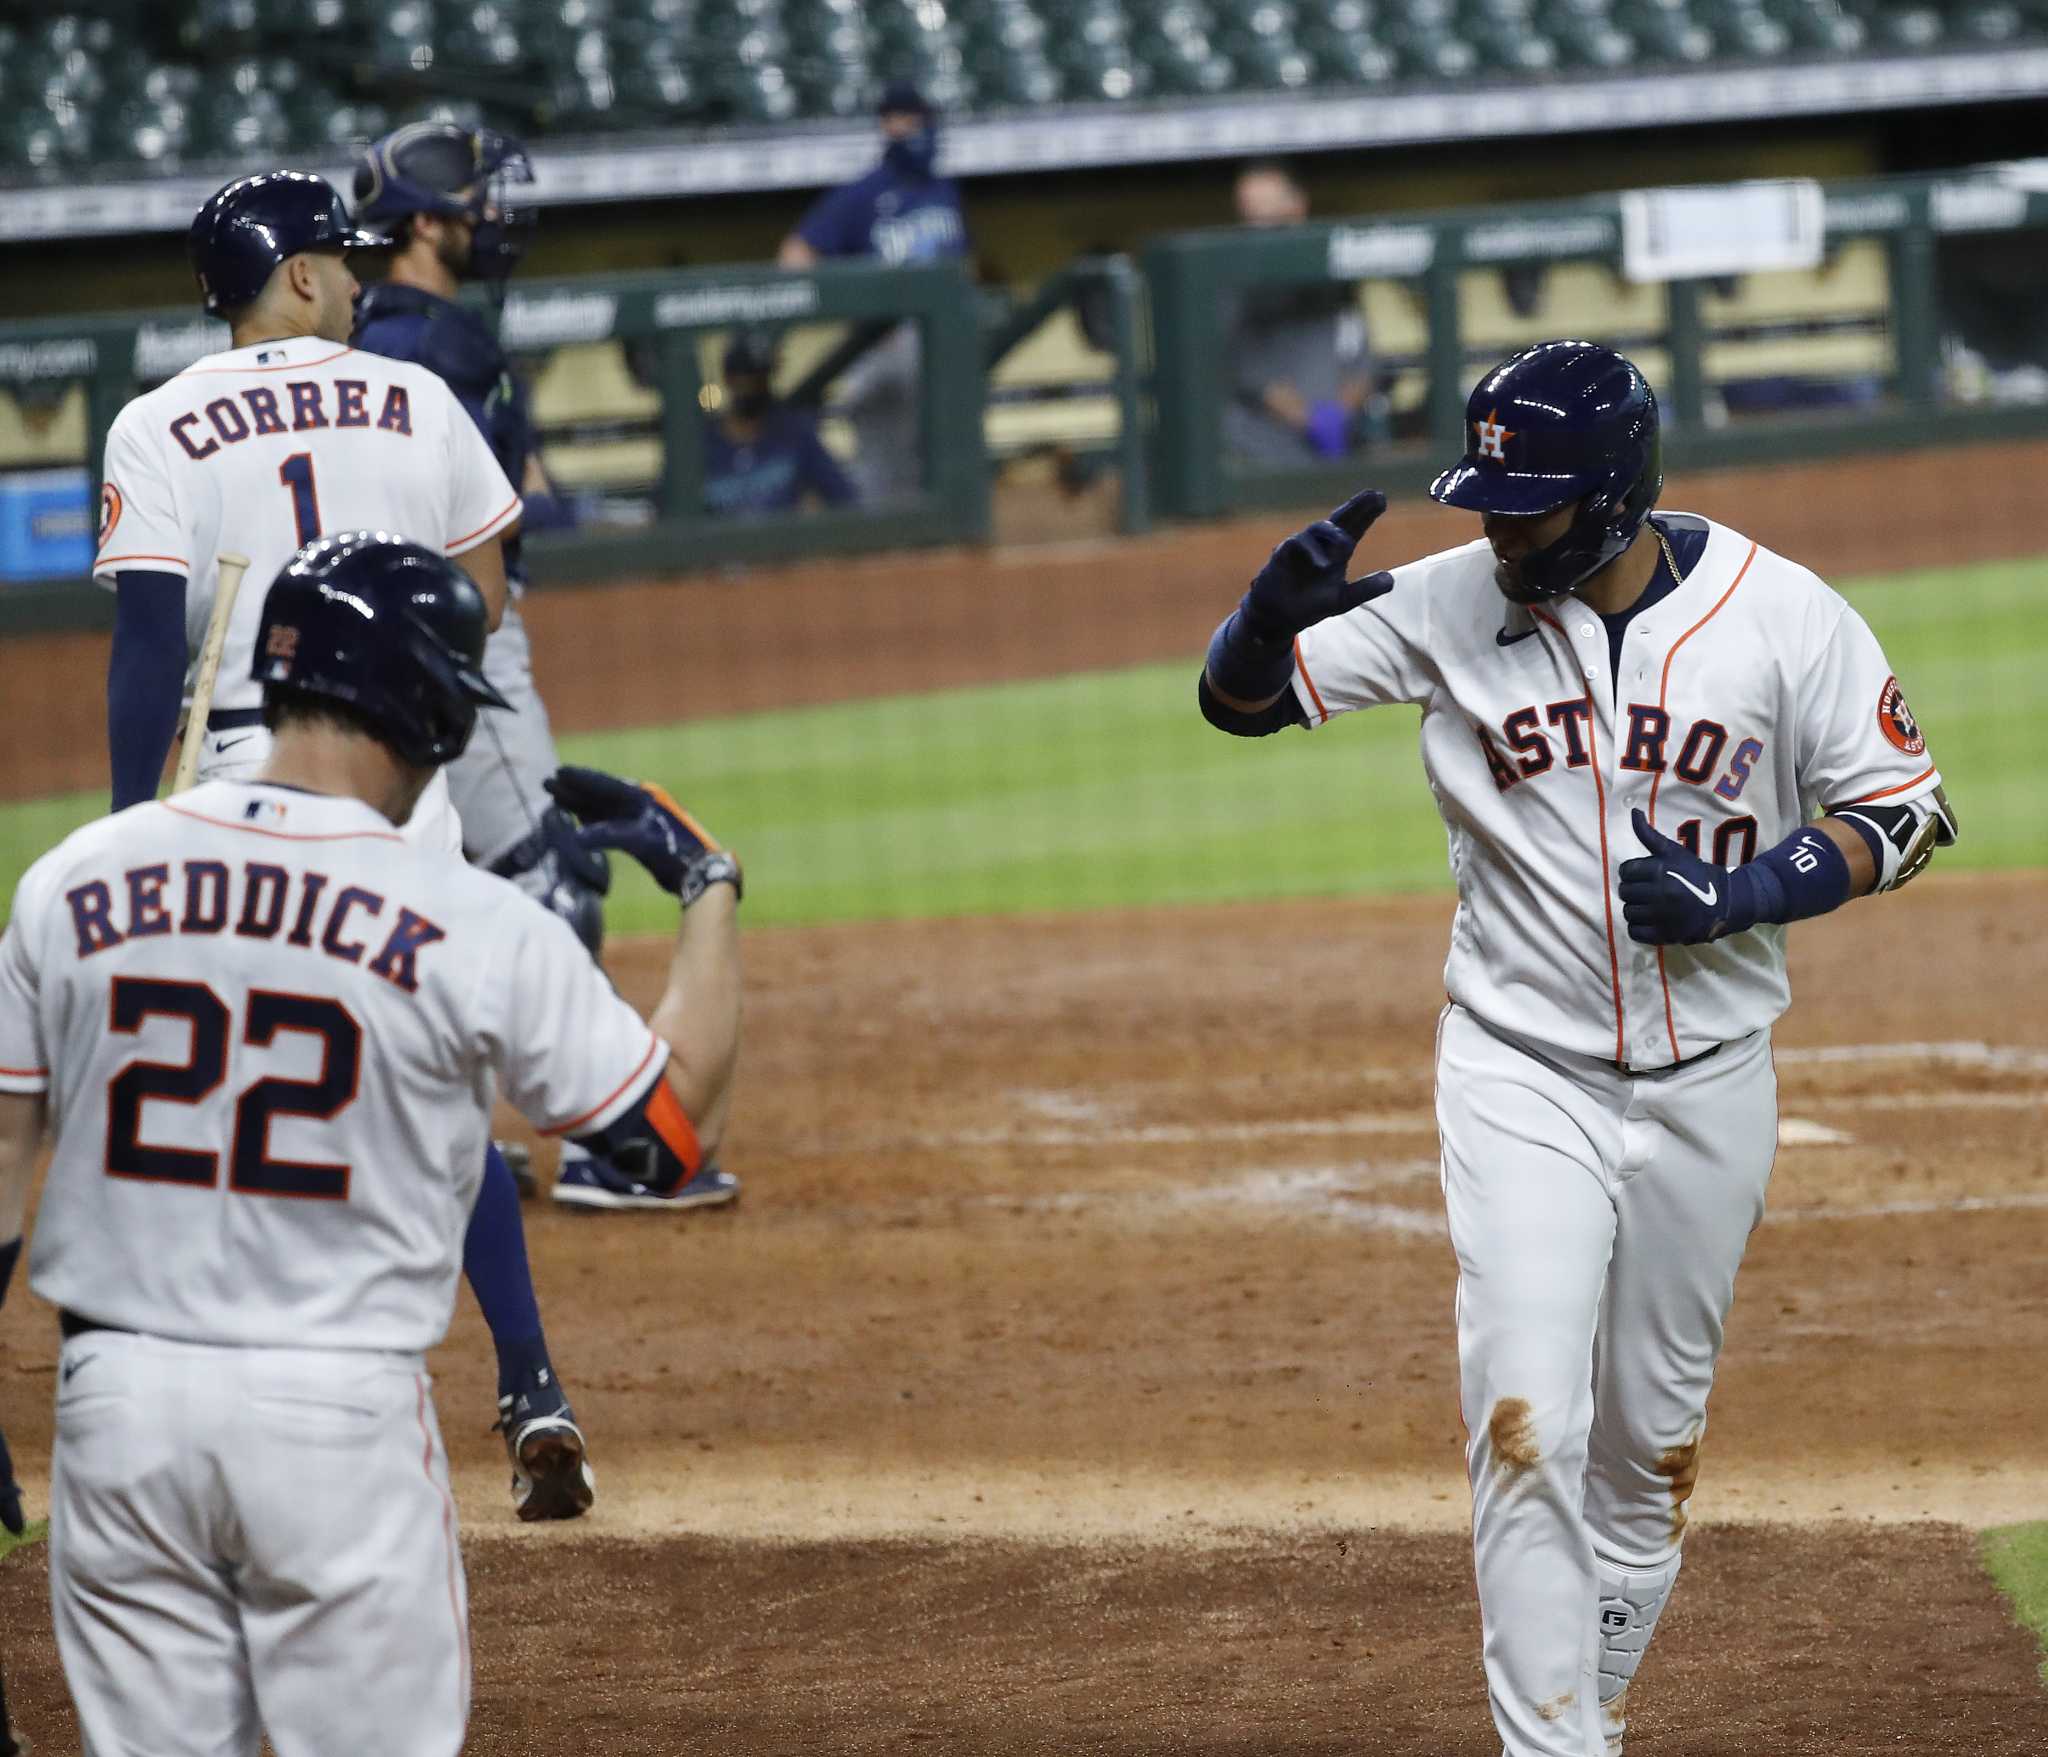 Houston Astros - Handshakes & high fives in Space City.